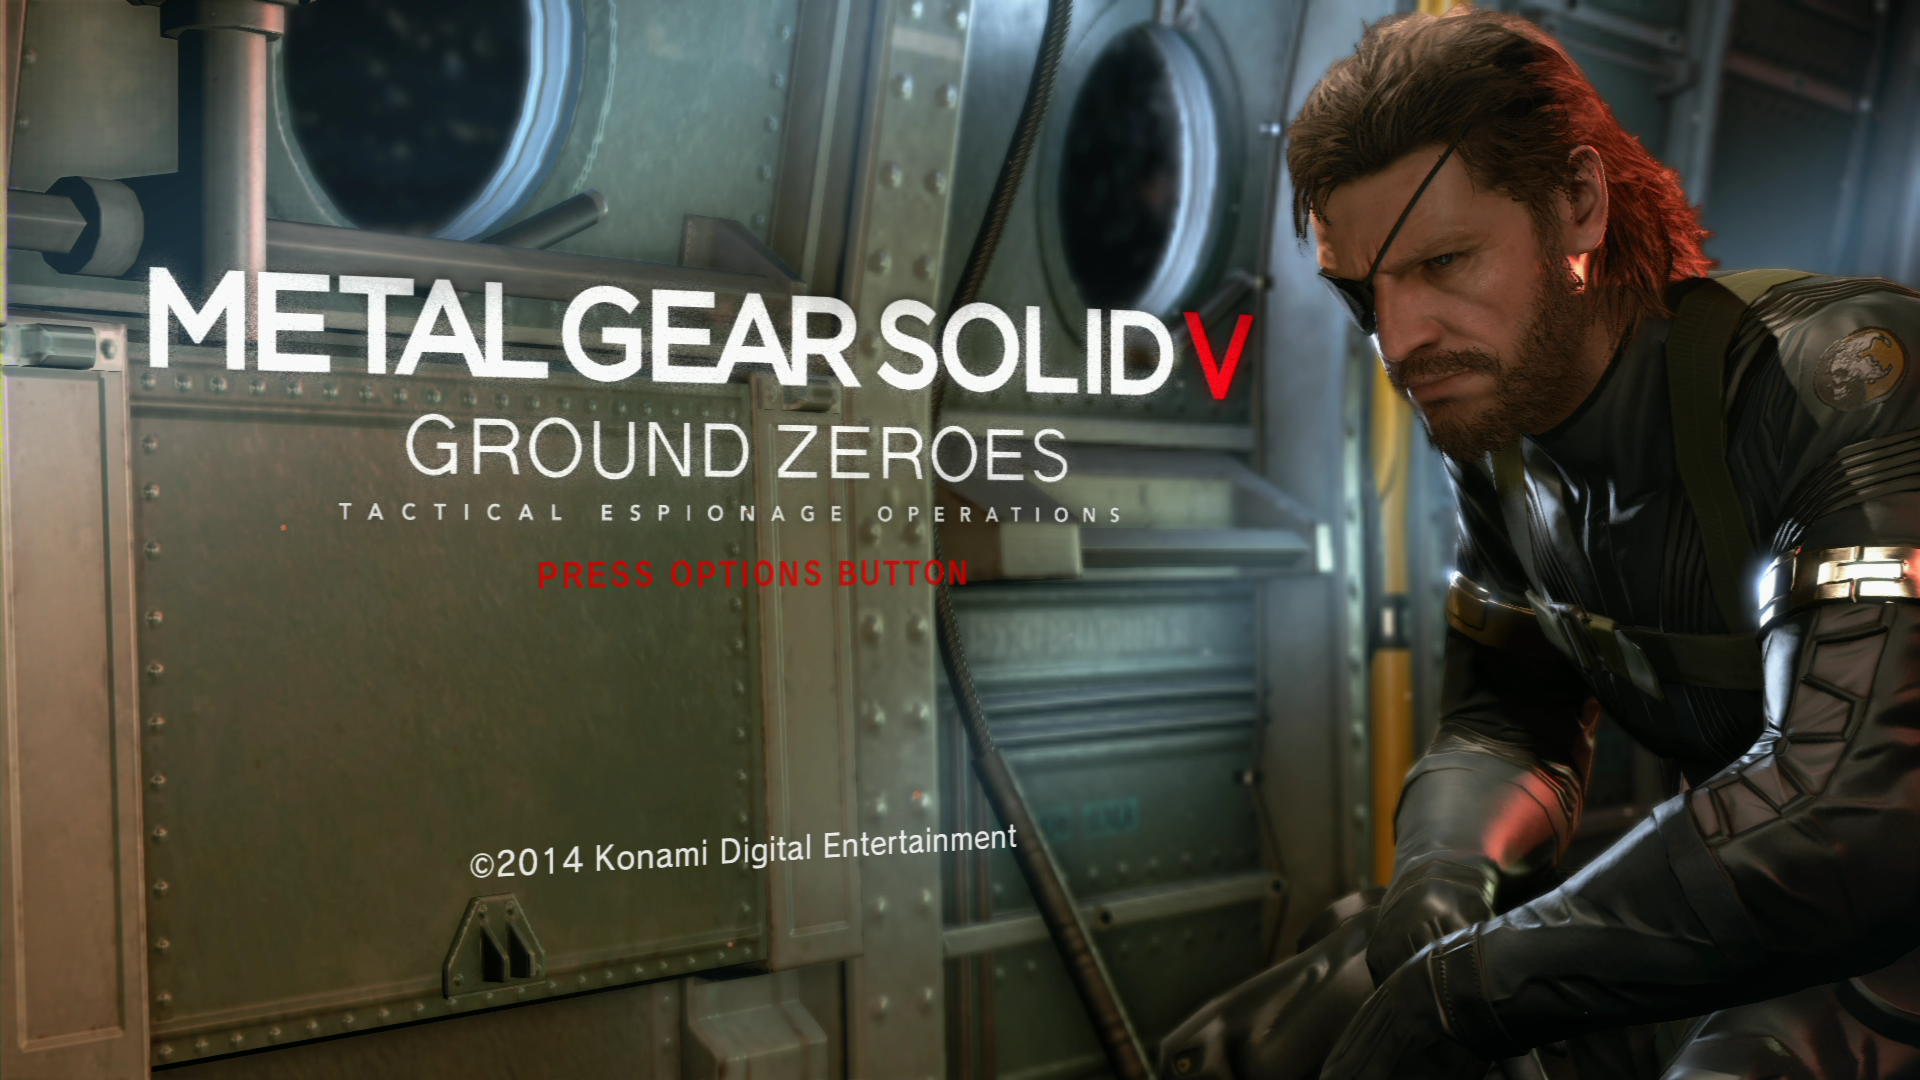 Despite controversy over its length, Metal Gear Solid 5: Ground Zeroes hits 1 million copies shipped